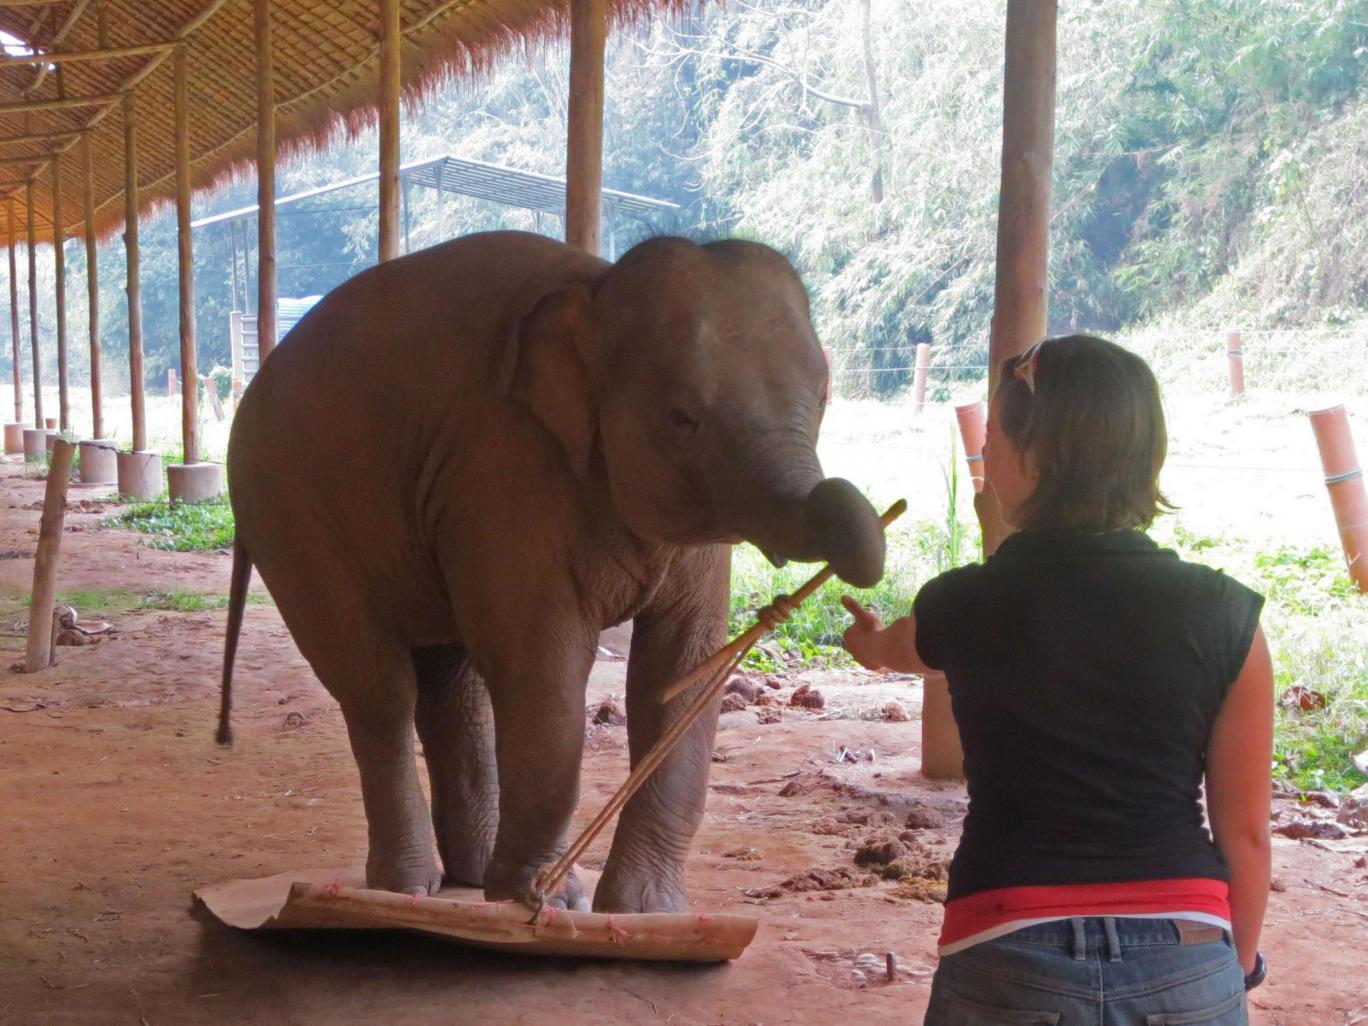 A Simple Test Just Proved Again How Smart Elephants Are